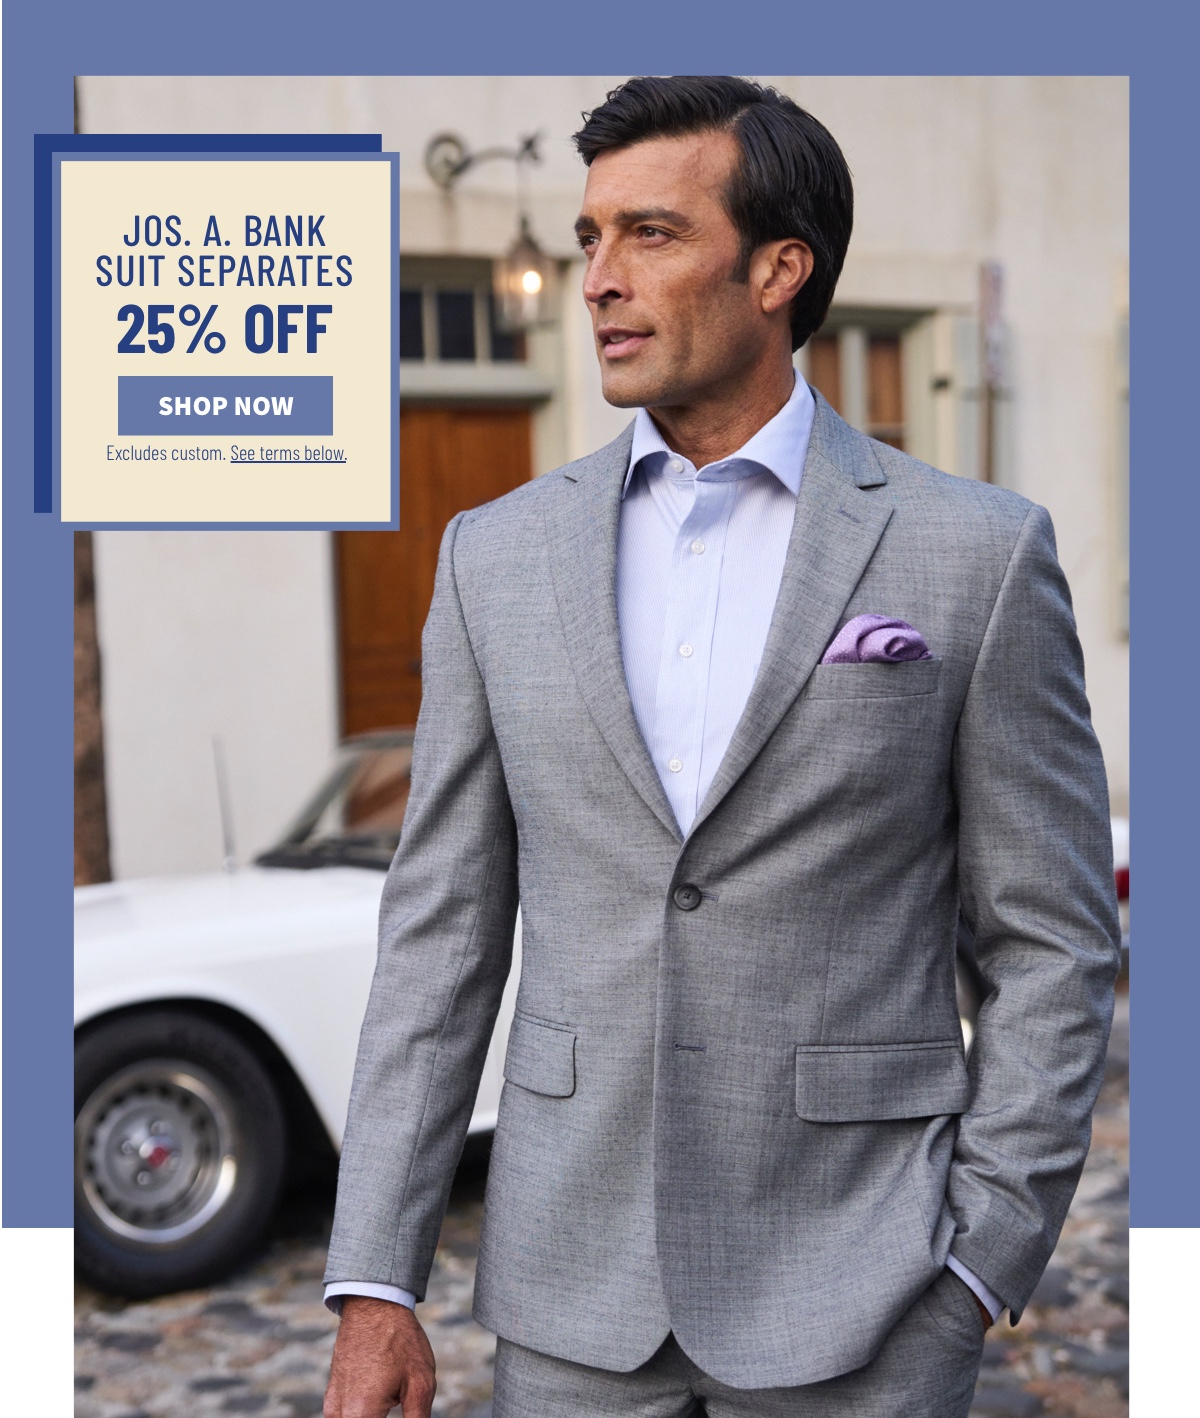 Jos. A. Bank Suit Separates 25% off Excludes custom. See terms below.